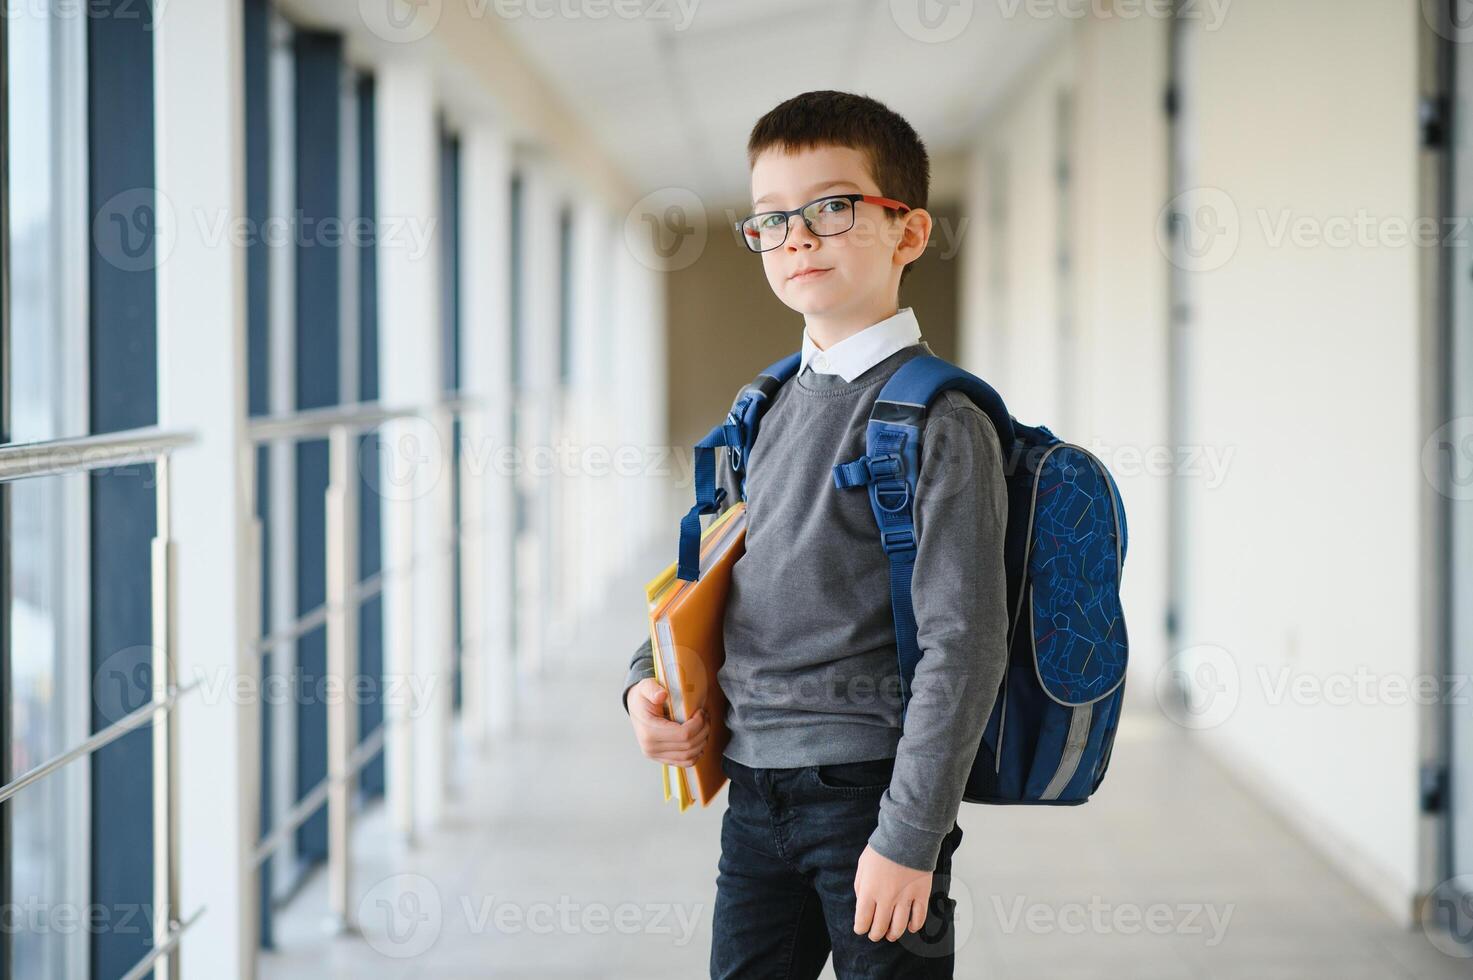 Schoolboy with schoolbag and books in the school. Education concept. Back to school. Schoolkid going to class. Stylish boy with backpack. Boy ready to study. photo